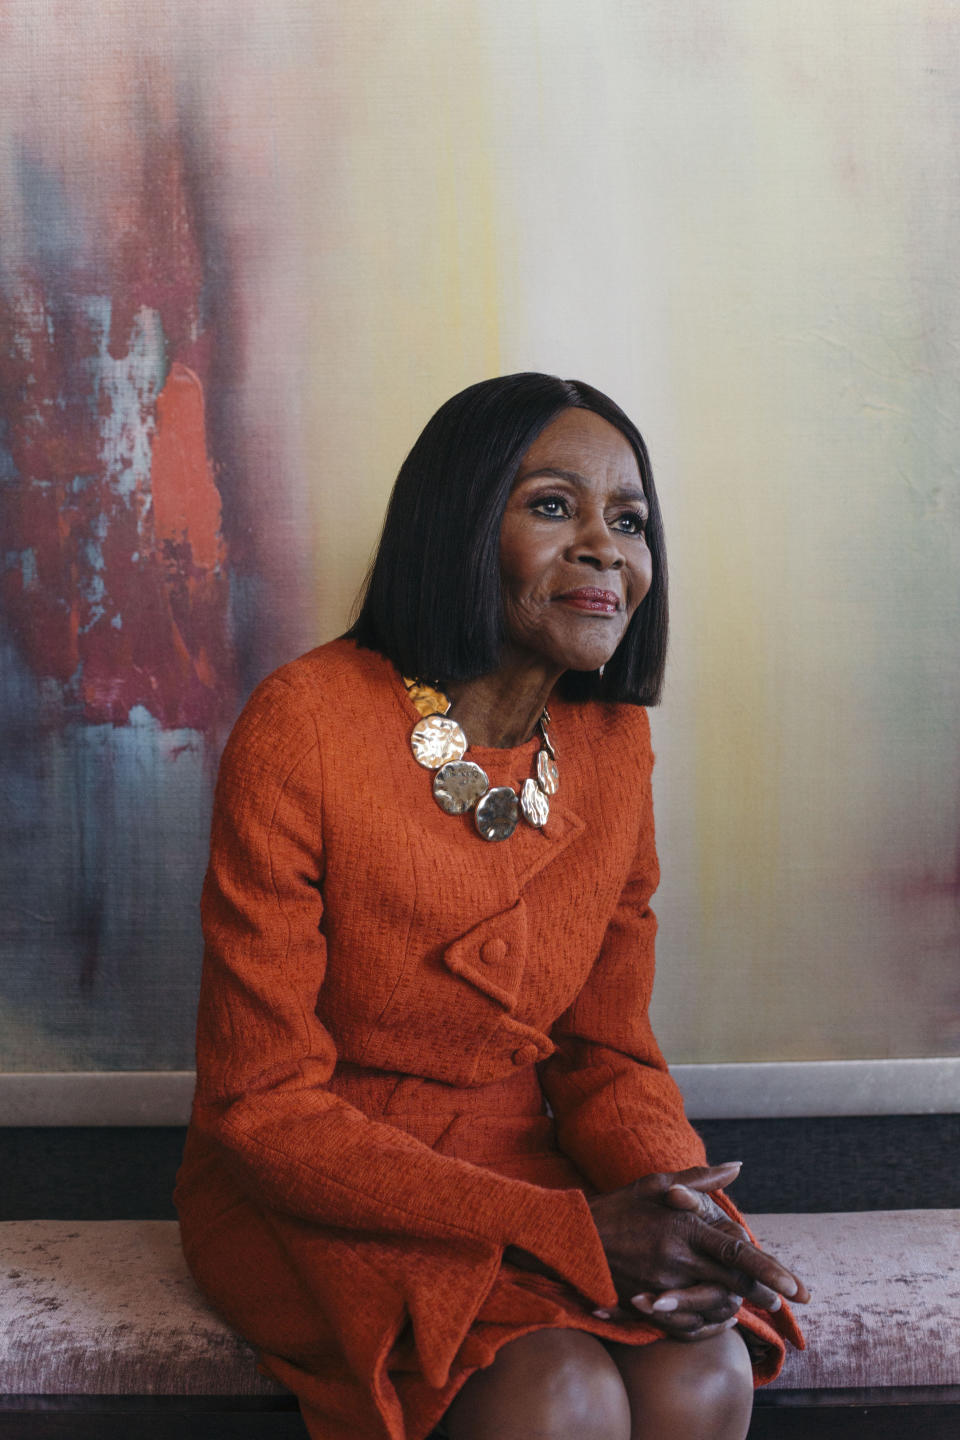 Actor Cicely Tyson poses for a portrait taken in 2020. The photo is part of a collection called “the Impact of Images” collection curated by Lead With Love, in collaboration with the studio and production company behind the film “Till.” (Noémie Tshinanga via AP)